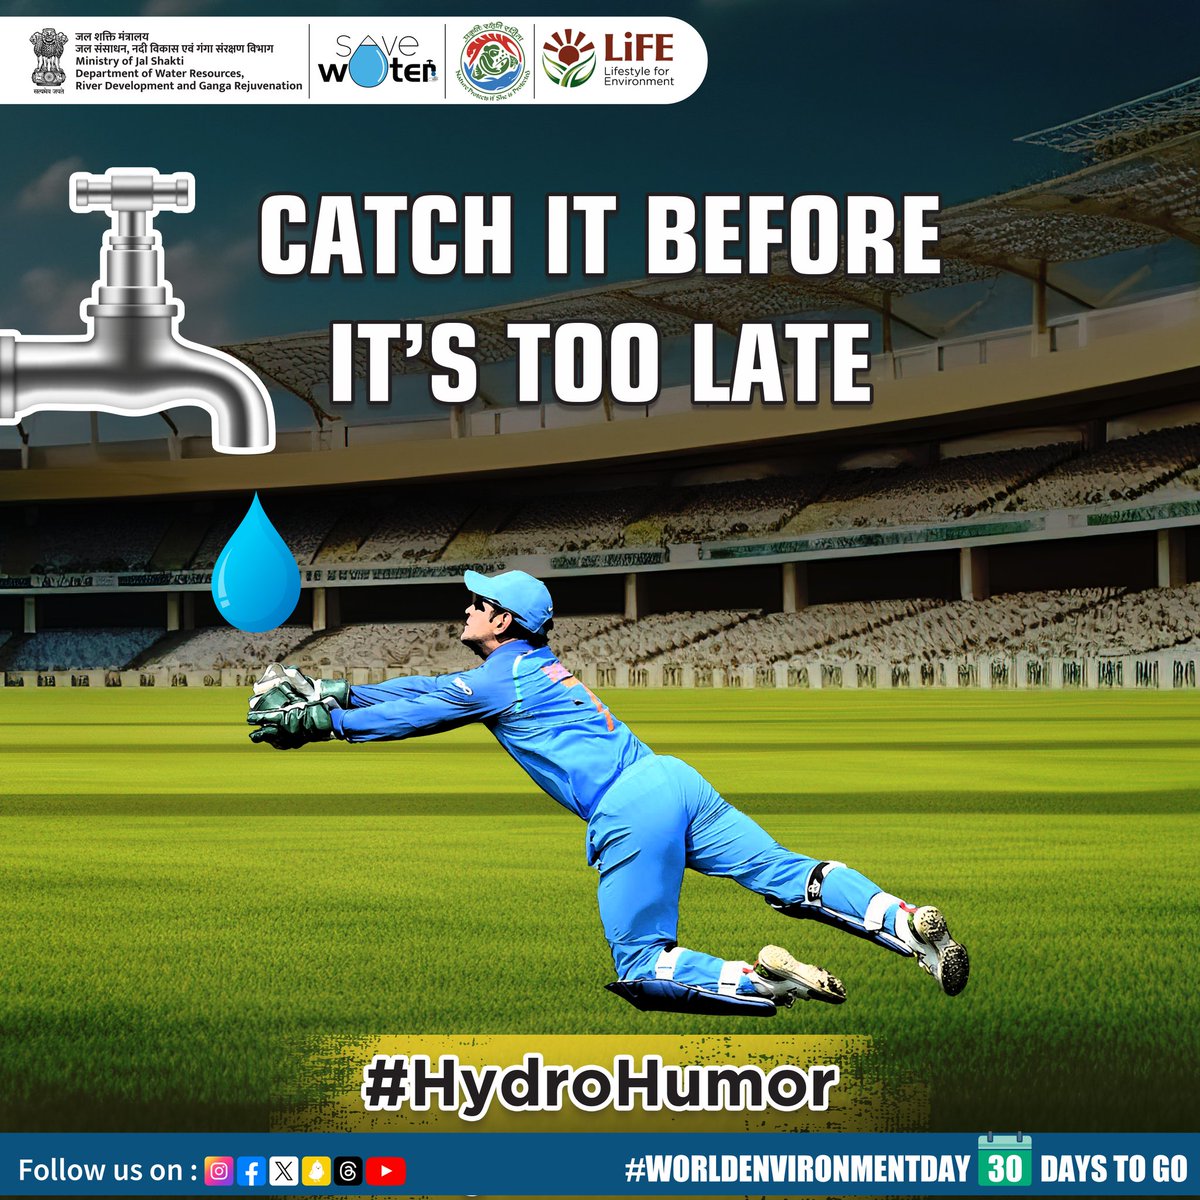 SAVE + H2O = #07 Catch wins matches, but catching every drop is real win for our planet! Let's step up our efforts in #waterconservation and make lasting impact. Together, we can preserve this vital resource for future generations. #HydroHumor #EveryDropCounts #MissionLiFE